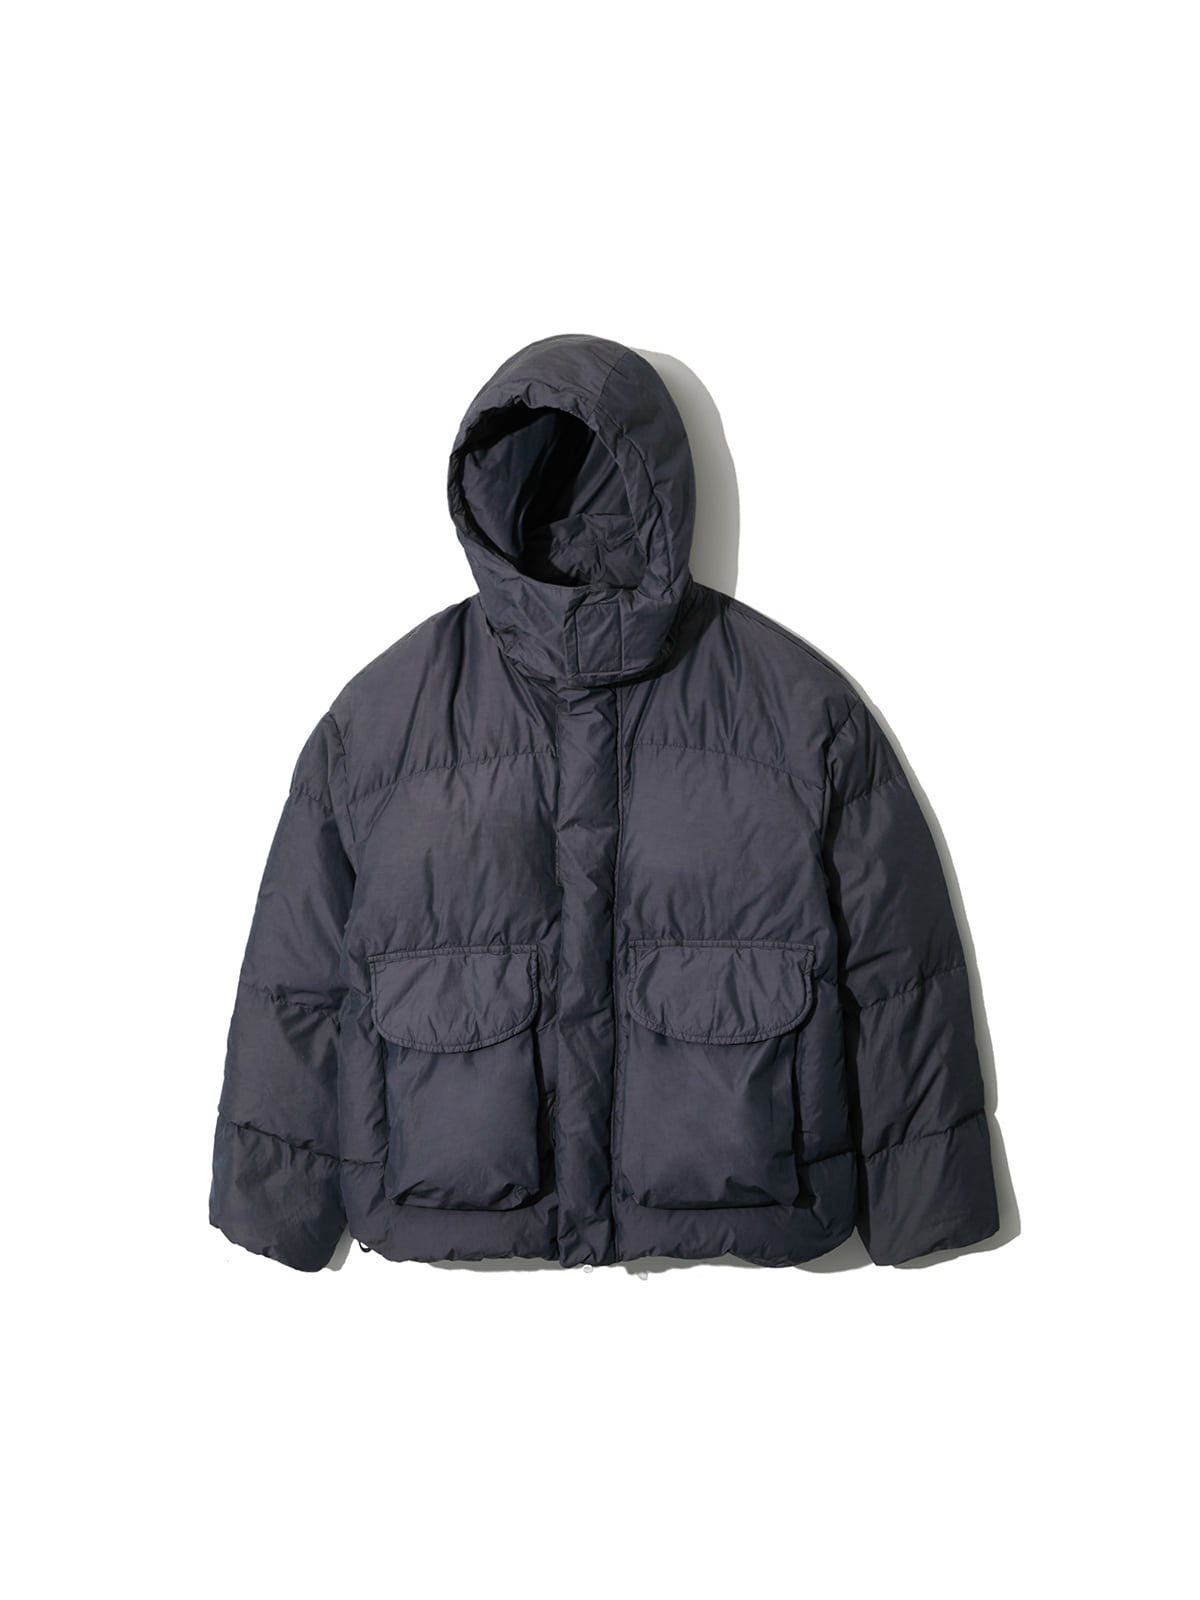 DISCOLORED GOOSE DOWN DETACHABLE HOODED JACKET (NAVY)